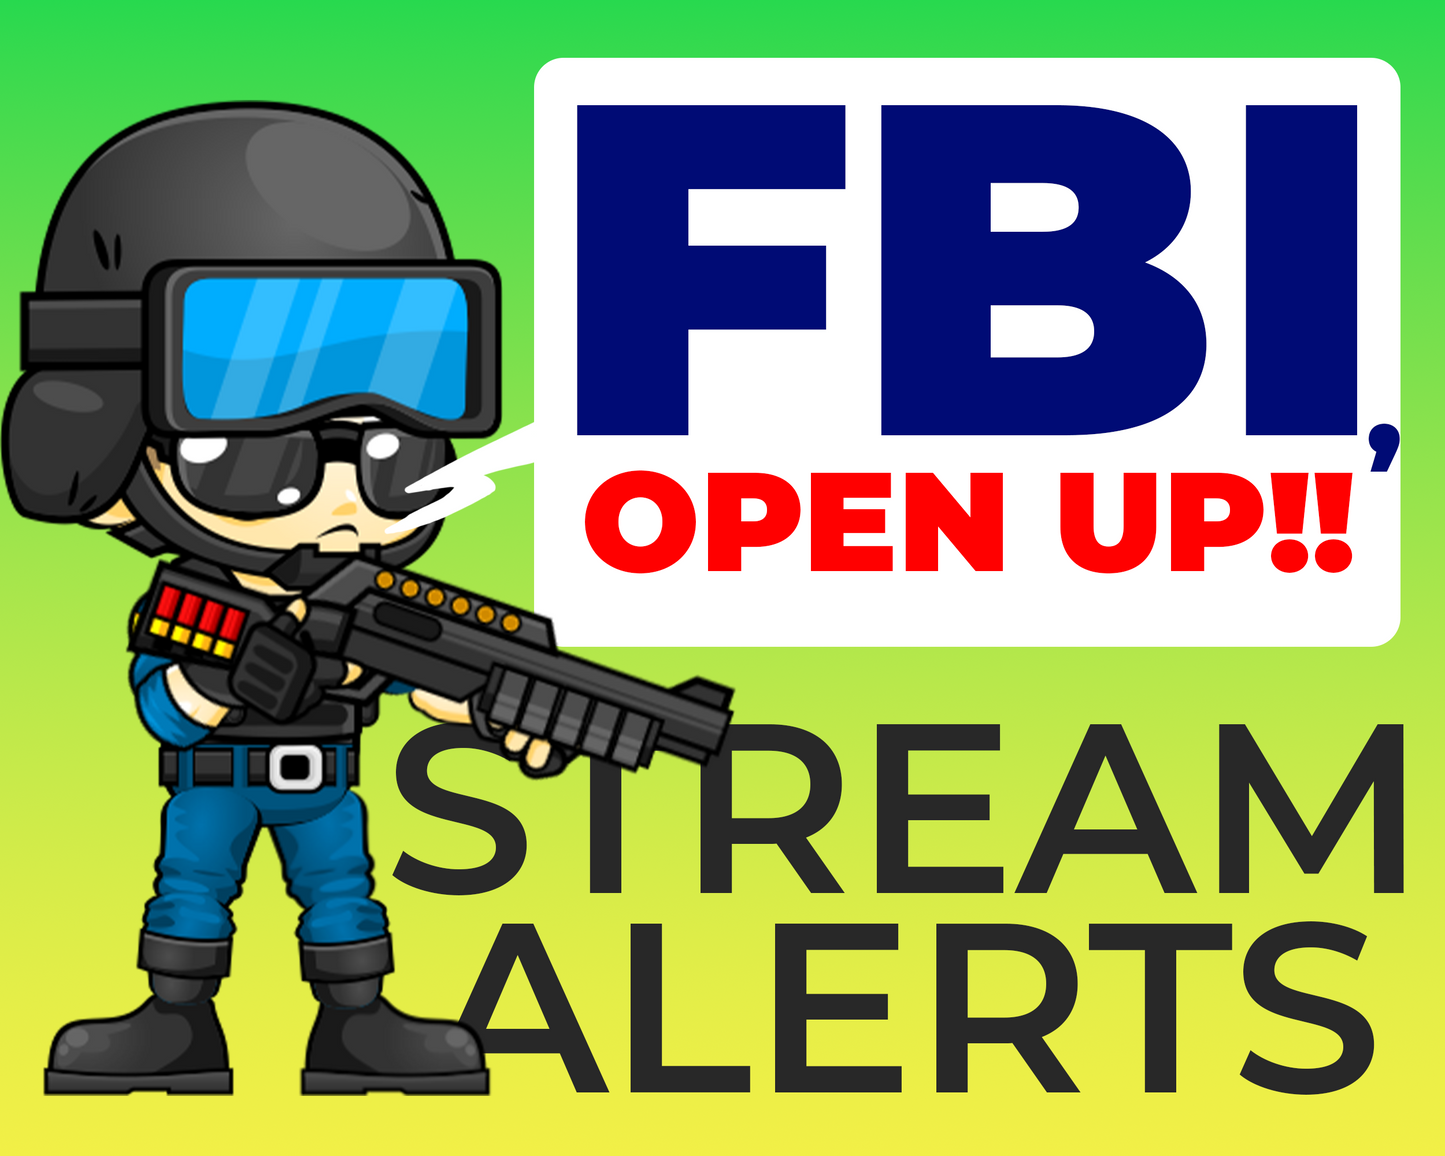 FBI Open Up! Alerts for Twitch Streams, SWAT Raid Meme Funny Animated Alert Overlay, Follower Subscriber Cheer Gift Raid Donation